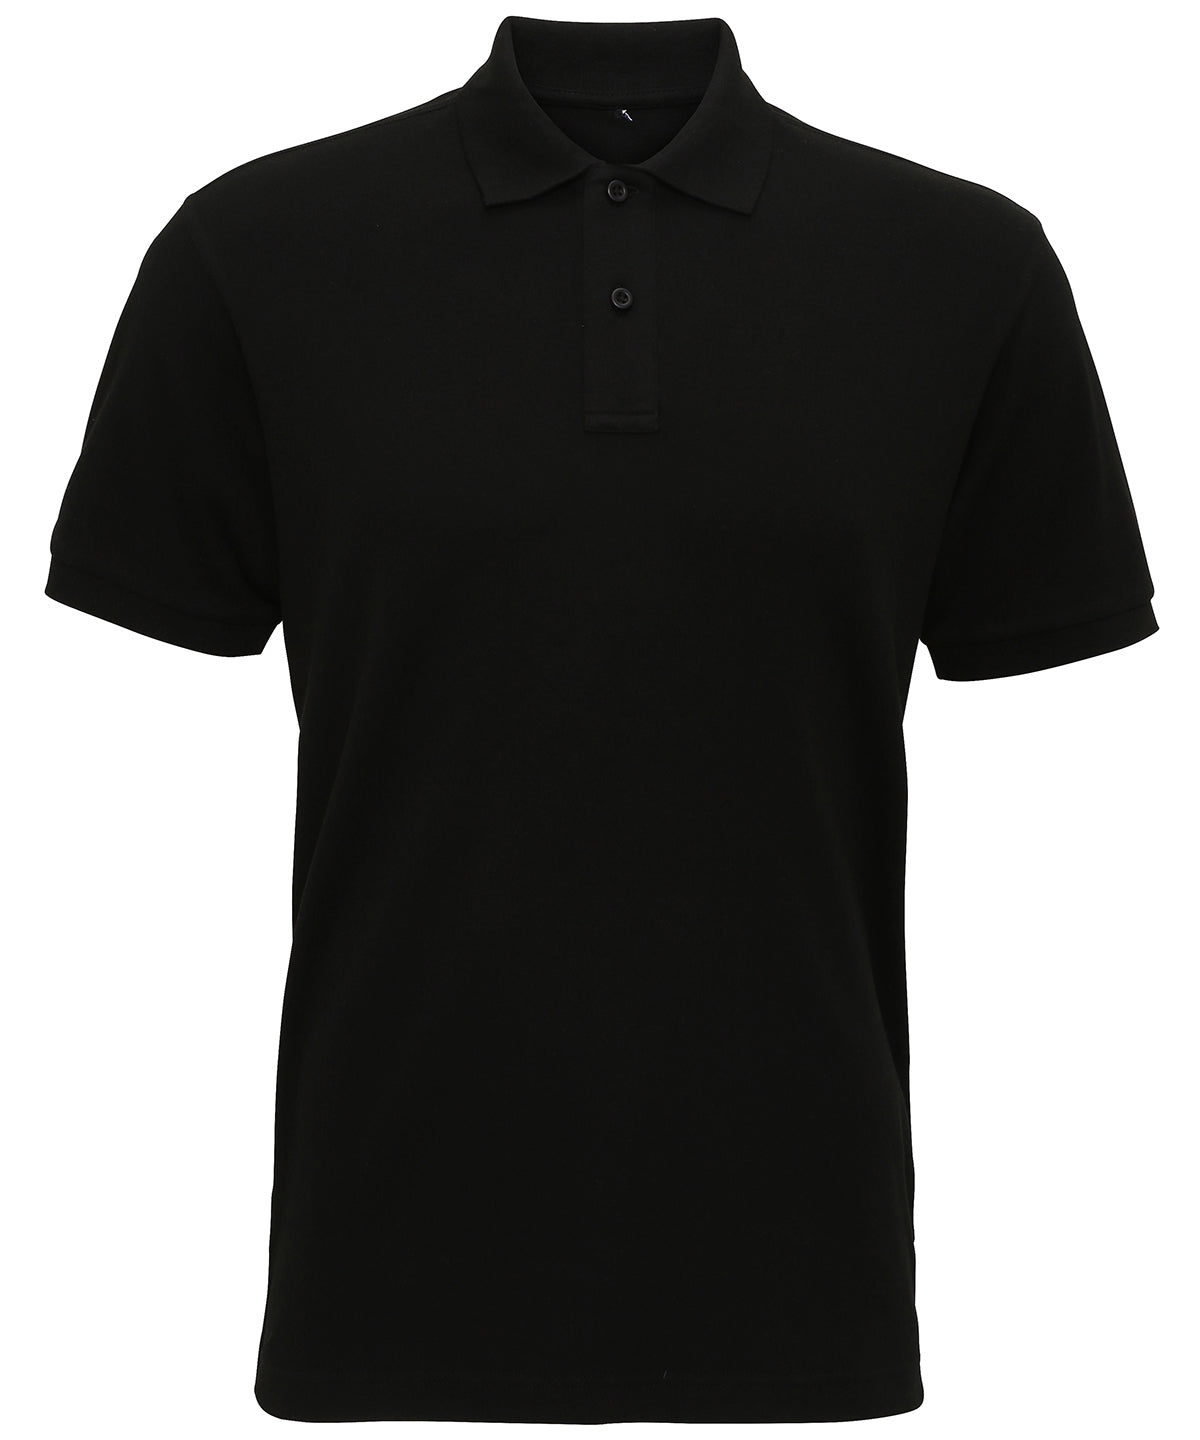 Personalised Polo Shirts - Black Asquith & Fox Men's super smooth knit polo